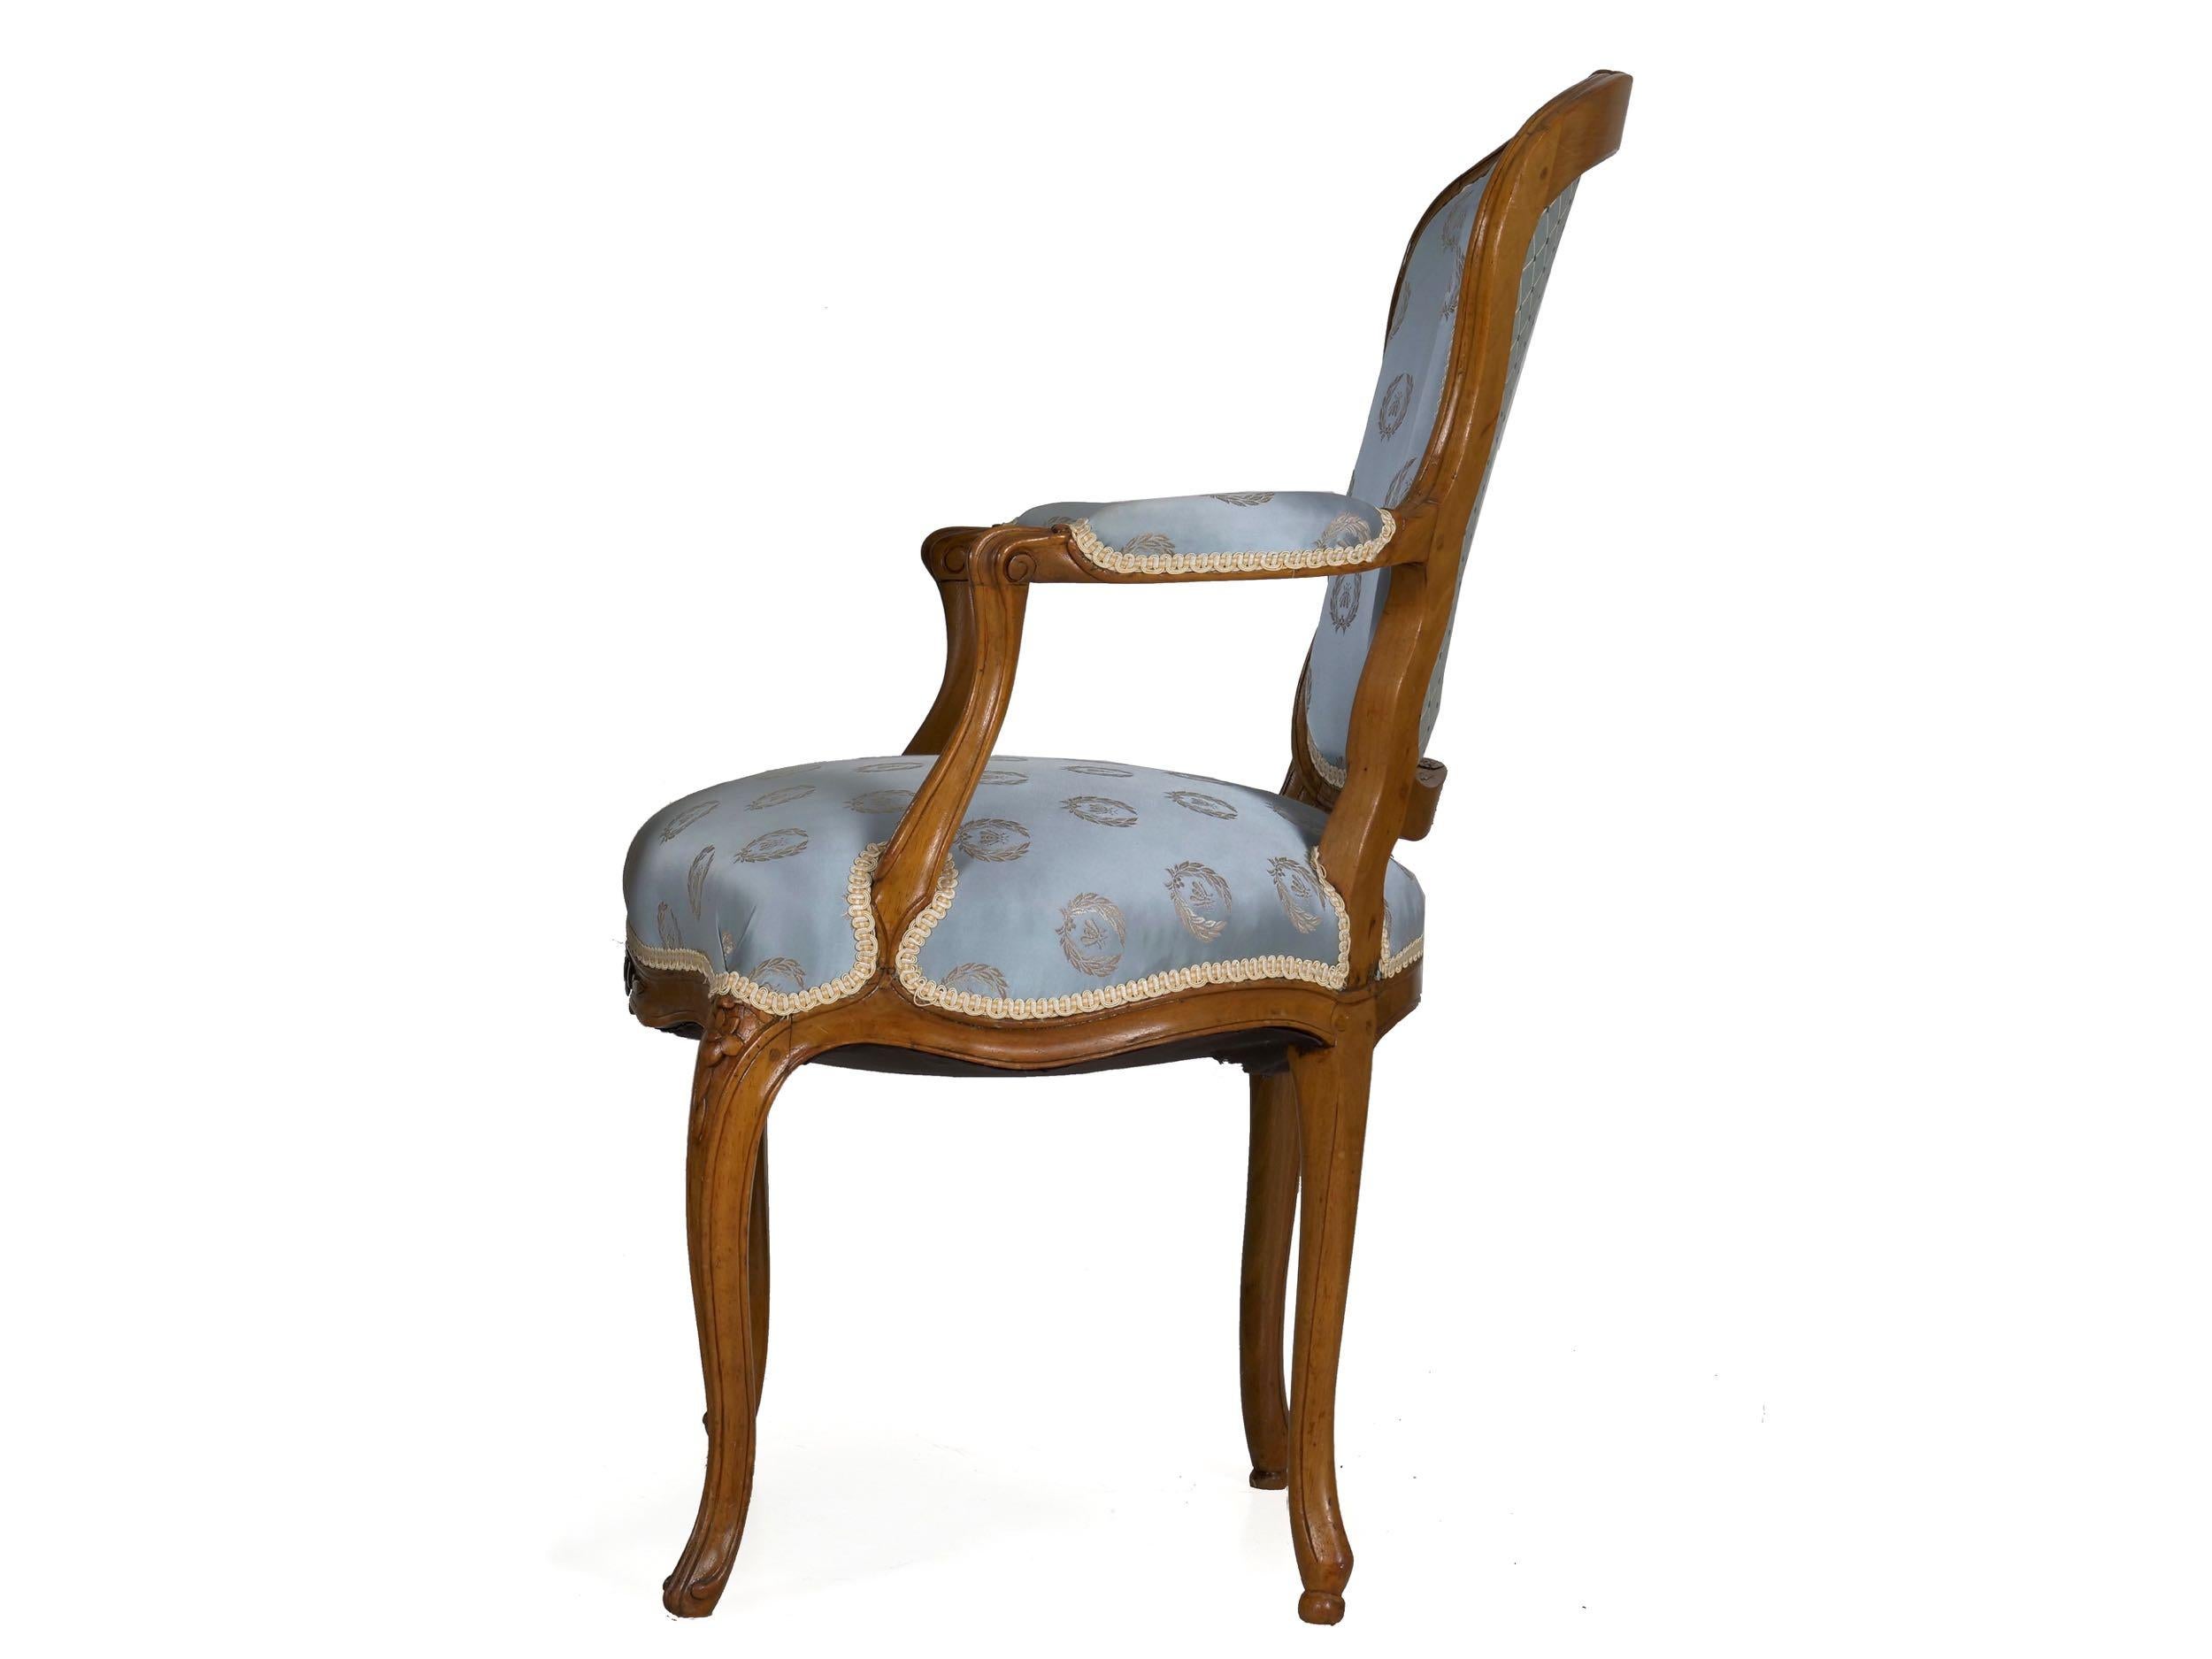 French Louis XV carved beechwood fauteuil,
circa late 18th century
Item # 007HWT21L-1 

An attractive carved beechwood fauteuil of the last quarter of the 18th century, it features the typical carved embellishments of the period including a